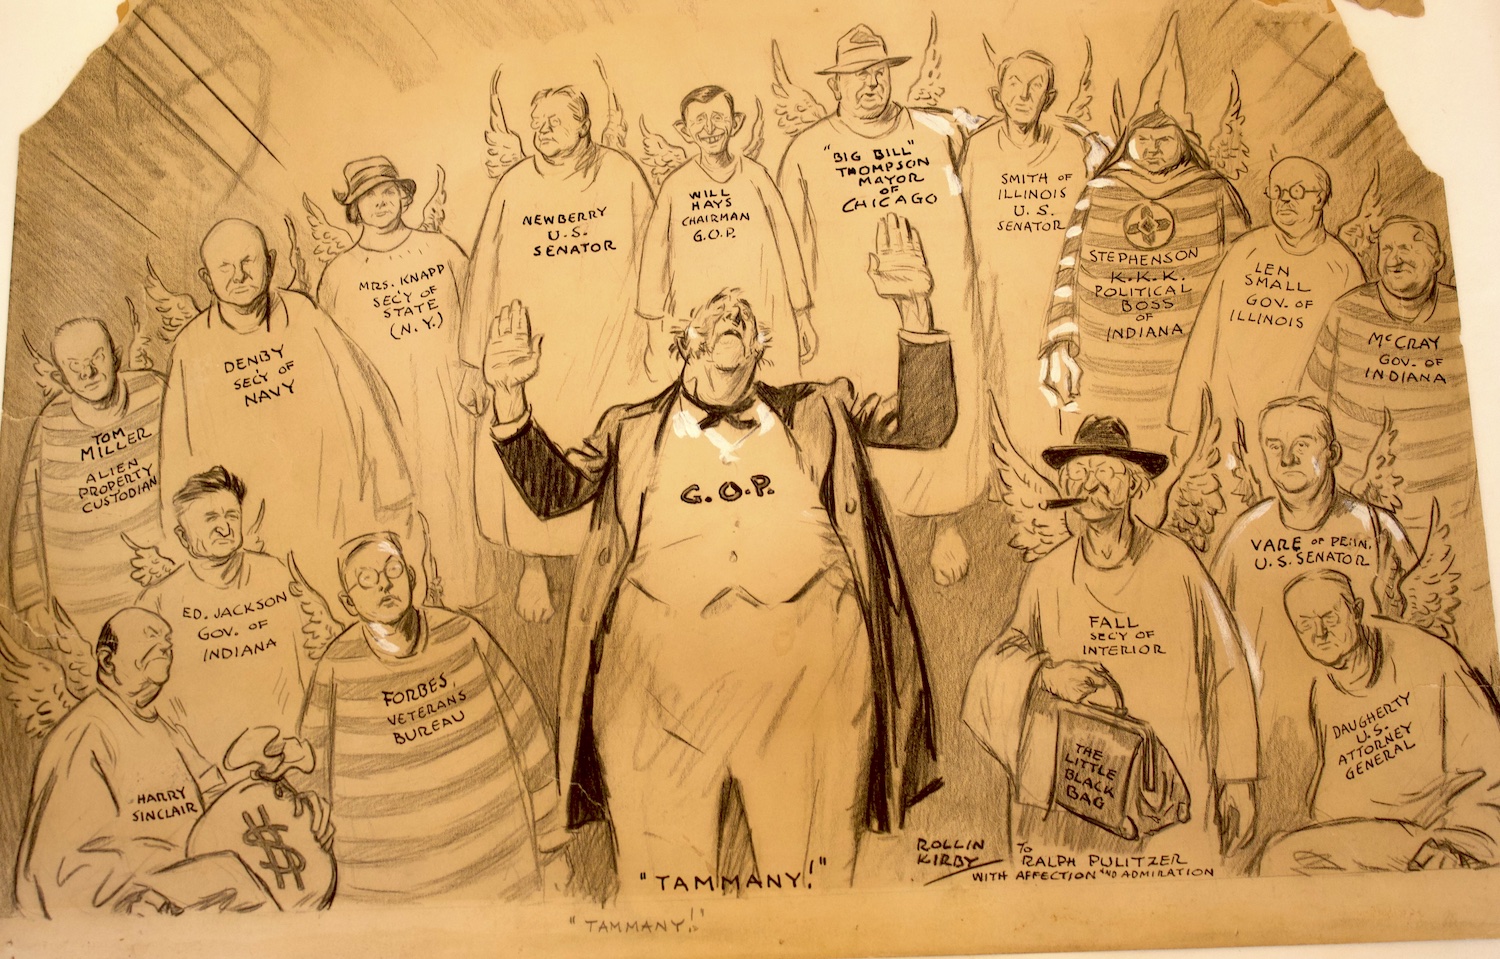 At UCLA, Political Cartoon Collection Gift Includes Provisions for Maintenance, Instruction